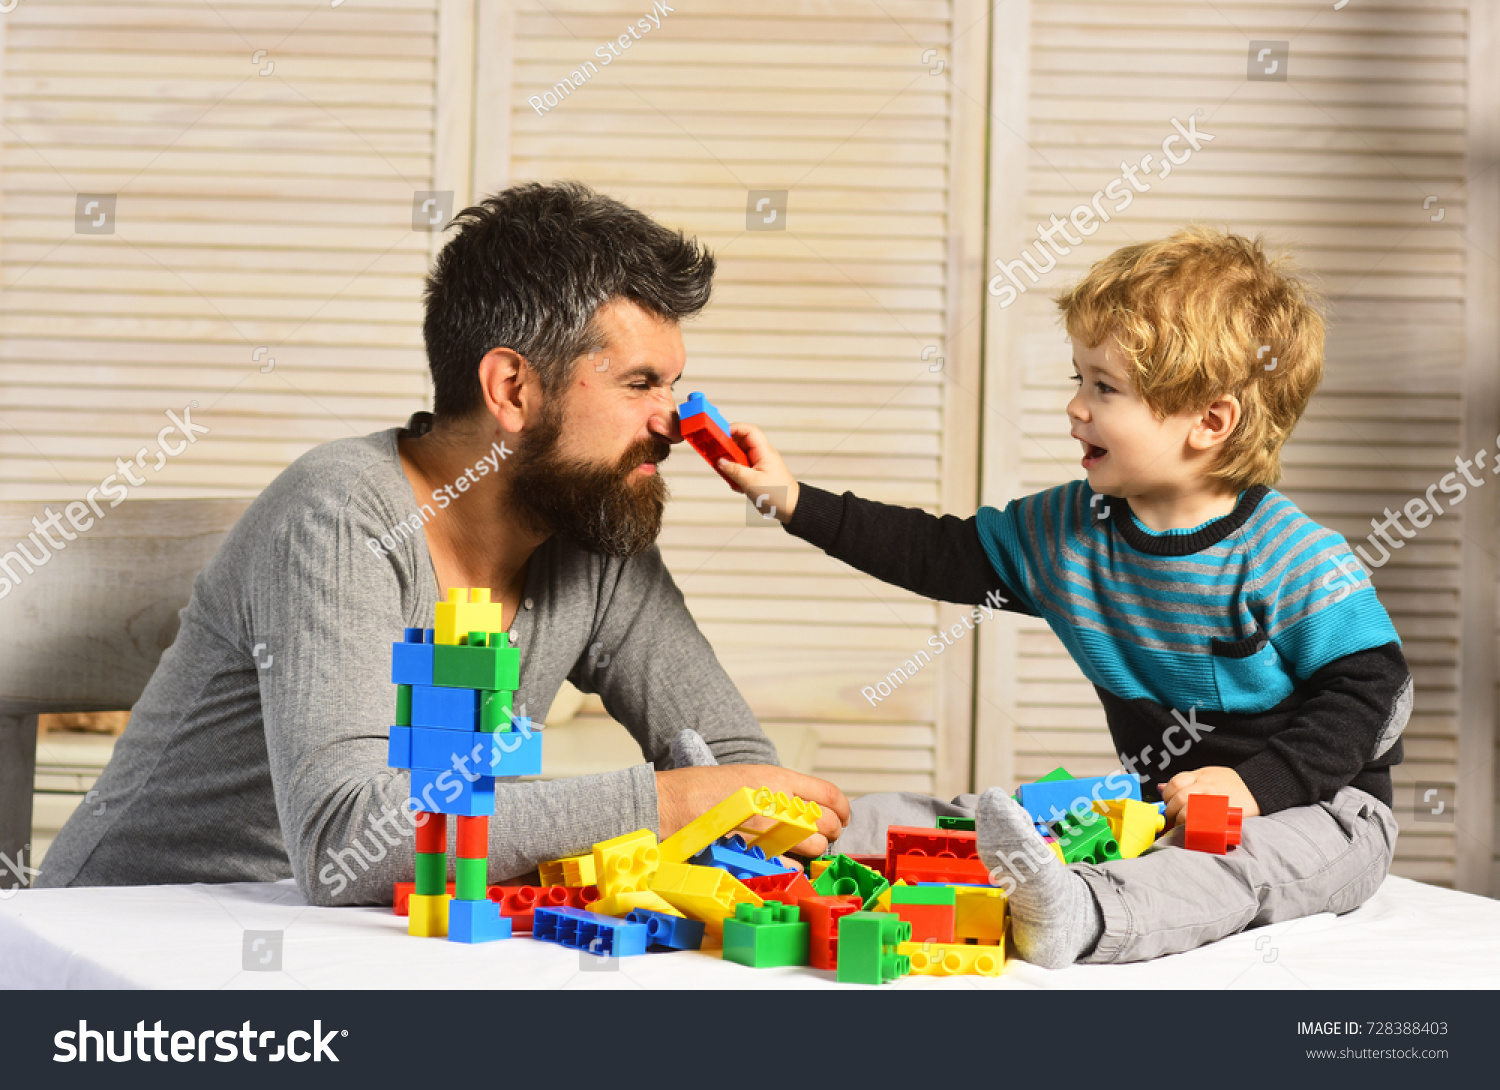 Family and childhood concept. Man with beard and boy play together on wooden wall background. Dad and kid build of plastic blocks. Father and son with happy faces create colorful robot with toy bricks #728388403